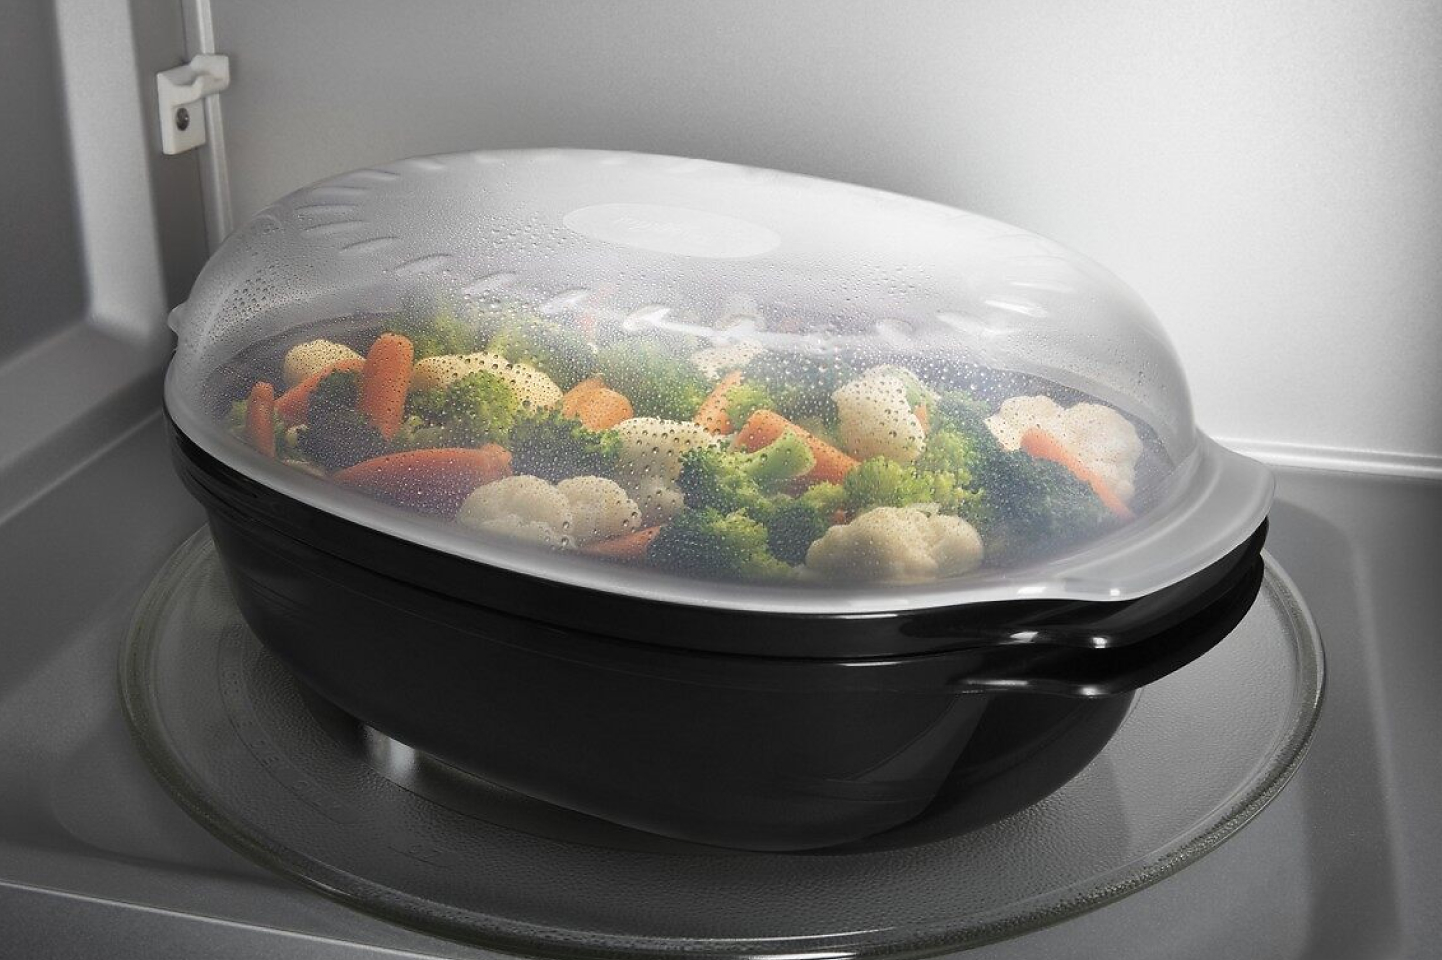 Microwave Cookware for Every Meal